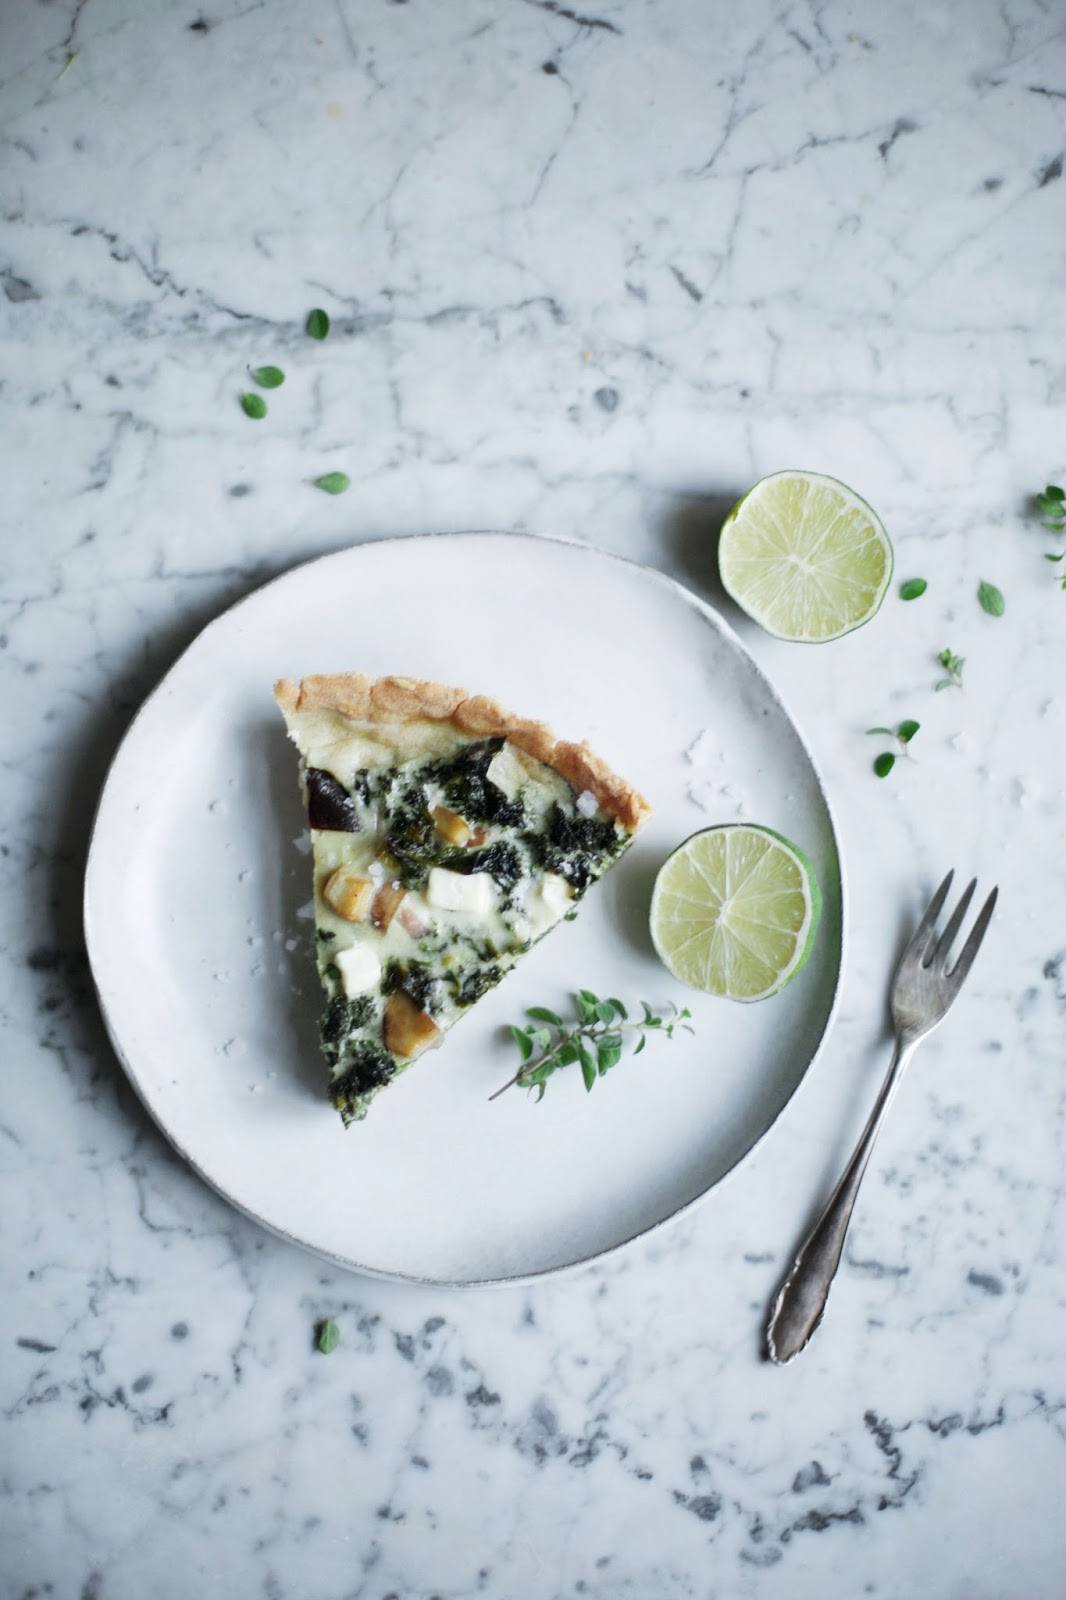 Kale Quiche with Mushrooms